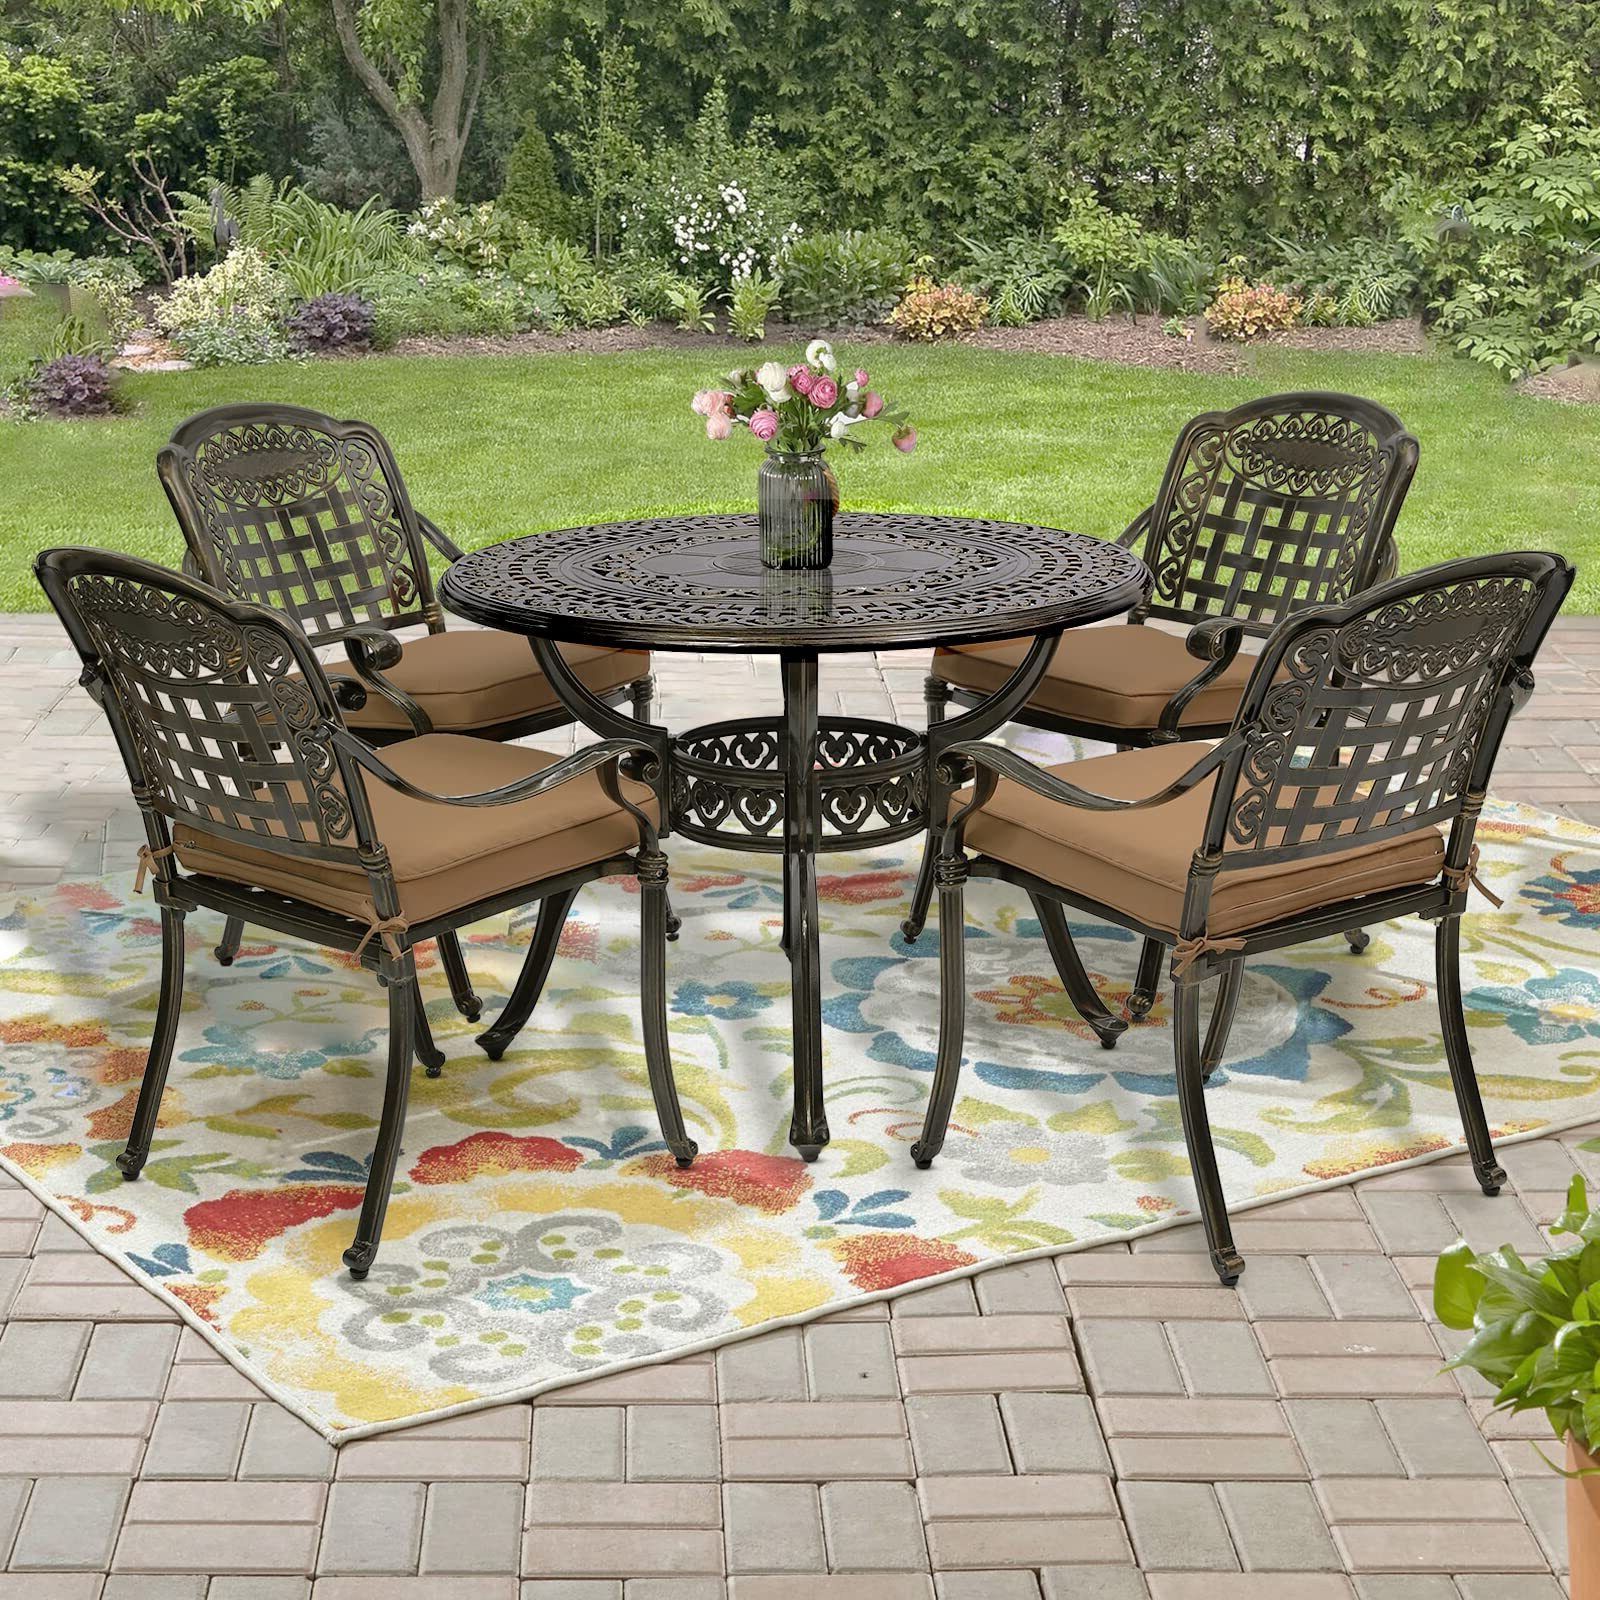 5 Piece Outdoor Patio Furniture Set With Fashionable 5 Piece Outdoor Patio Dining Set Cast Aluminum Includes 4 Chairs, 1 Round  Table (View 13 of 15)